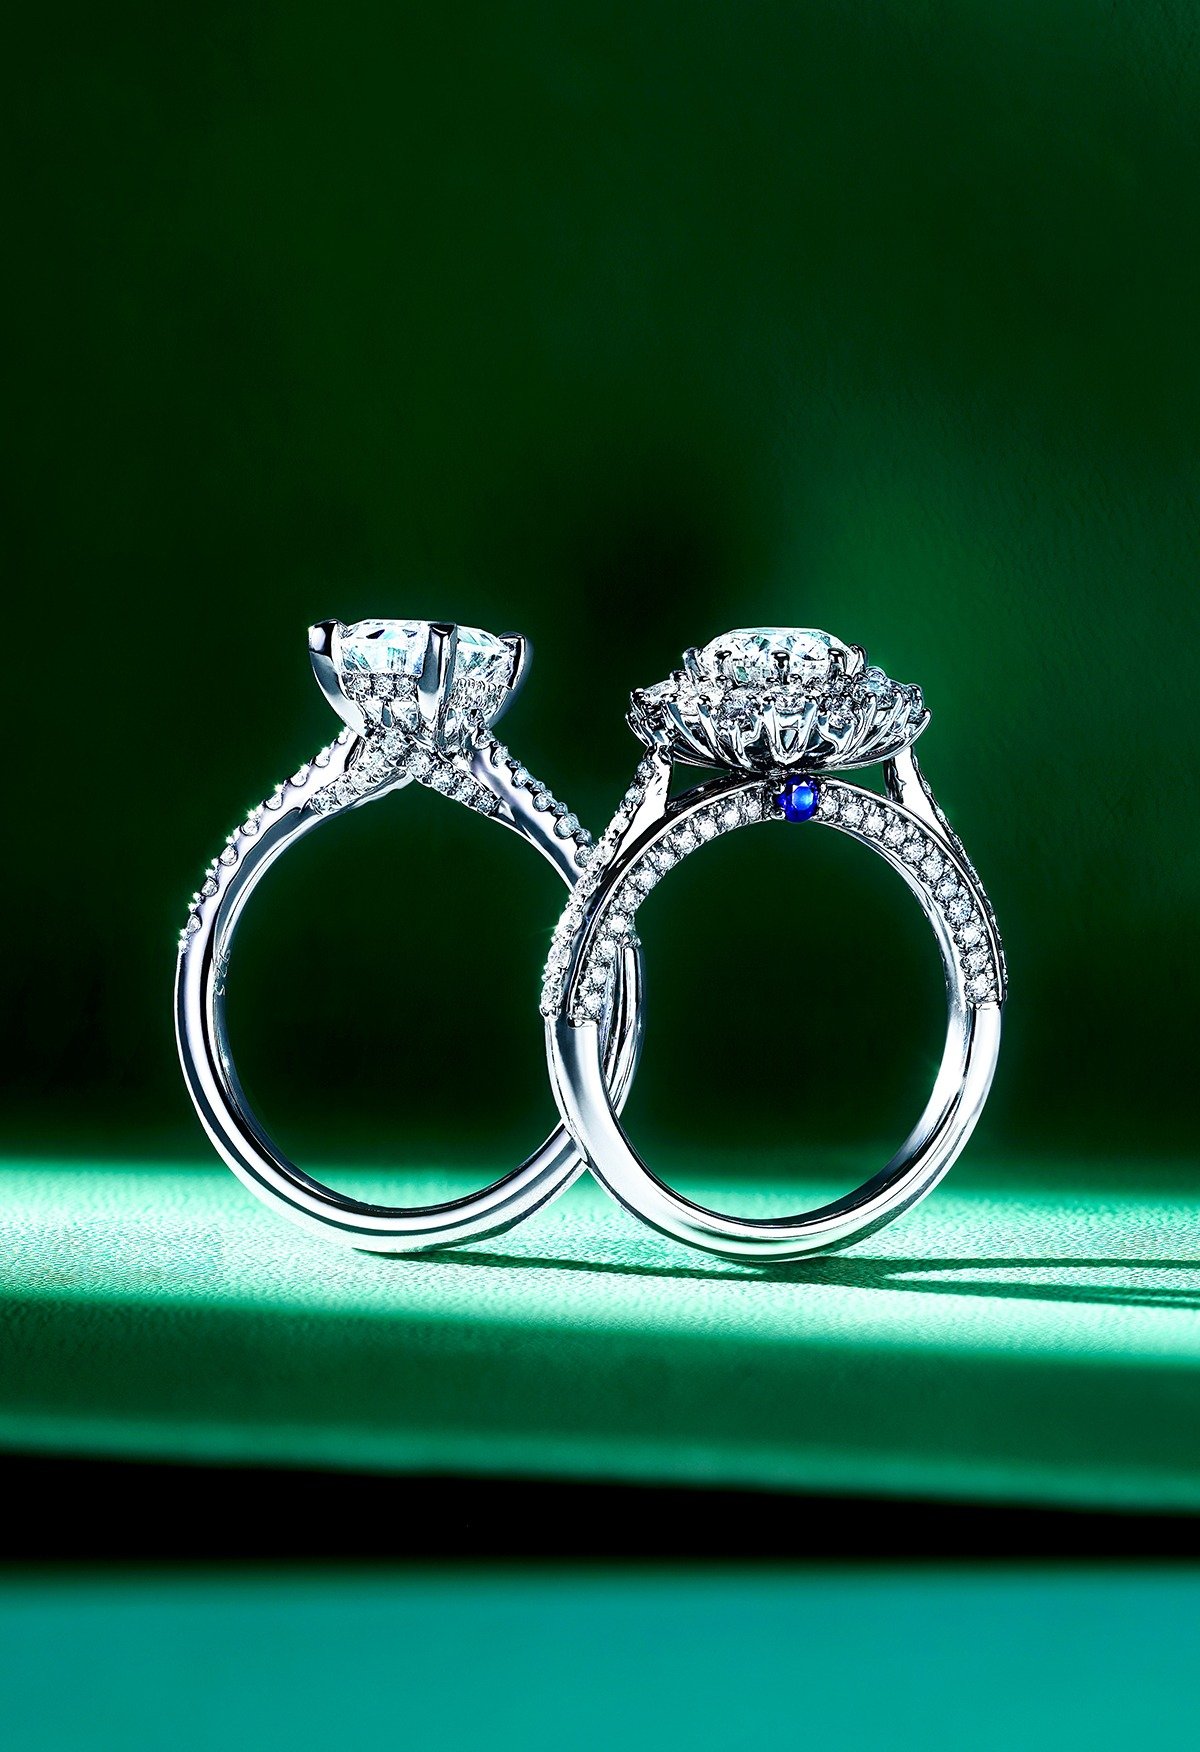 customize your engagement ring With Clarity